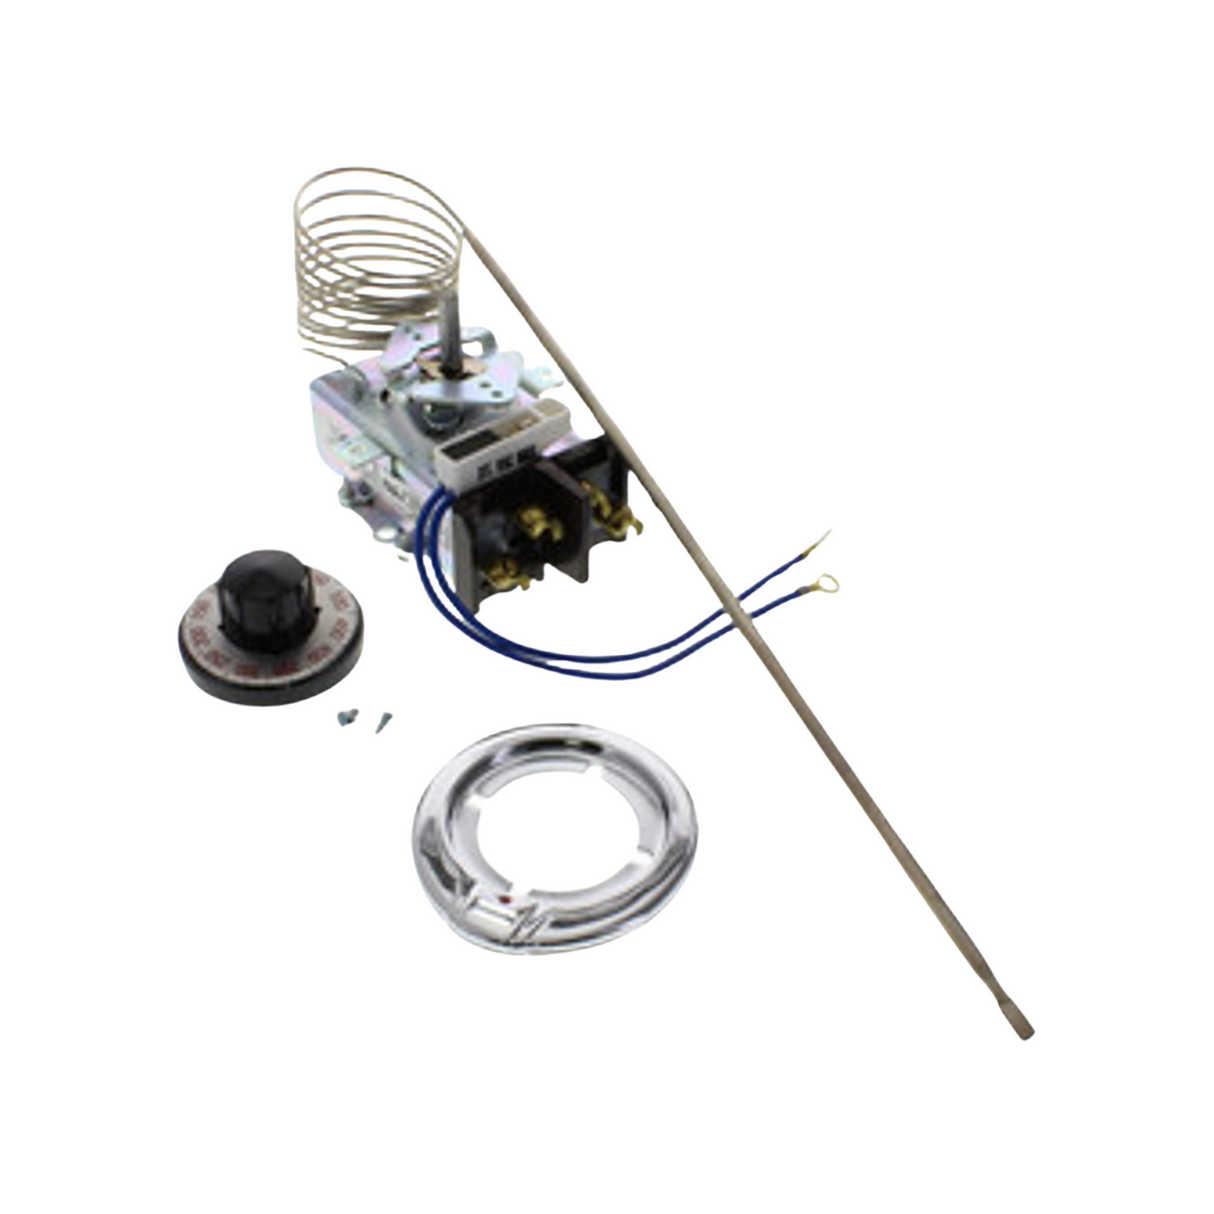 Robertshaw 5000-851 Electric Cook Control Thermostat Replacement